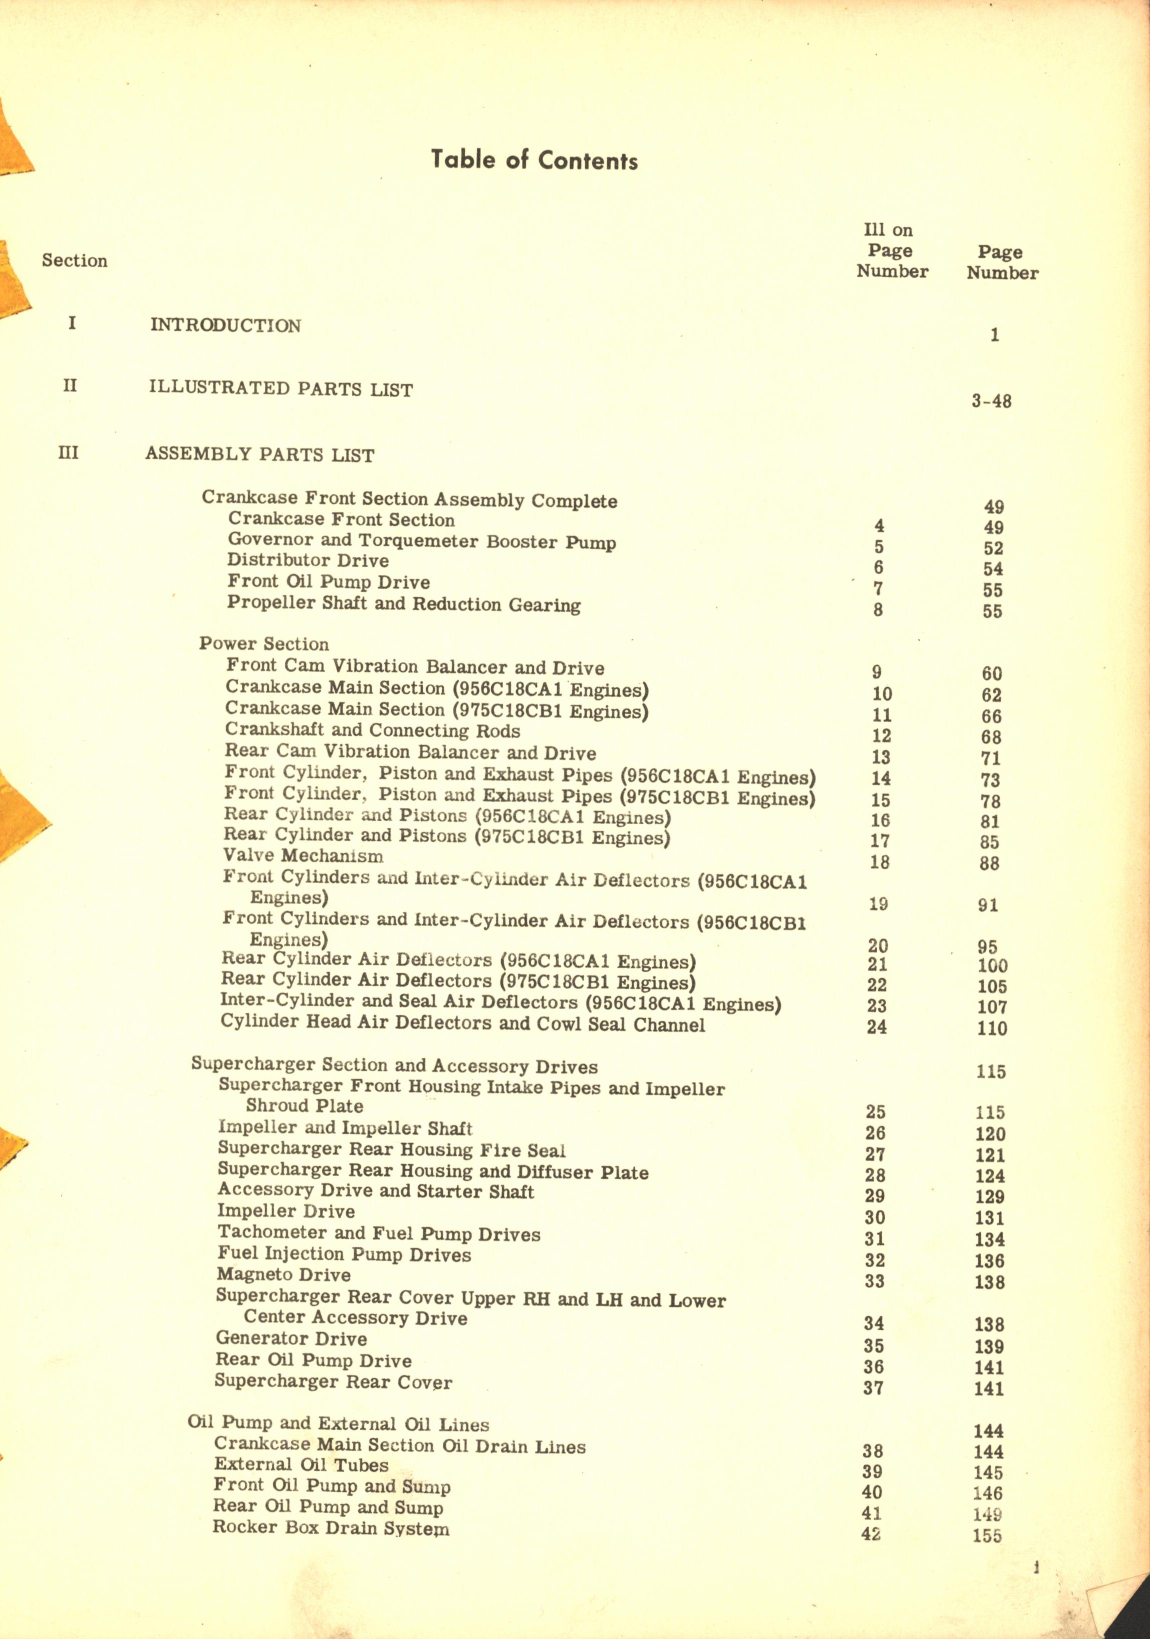 Sample page 3 from AirCorps Library document: Wright Aircraft Engines; Models 956C18CA1 and 975C18CB1 Parts Catalog